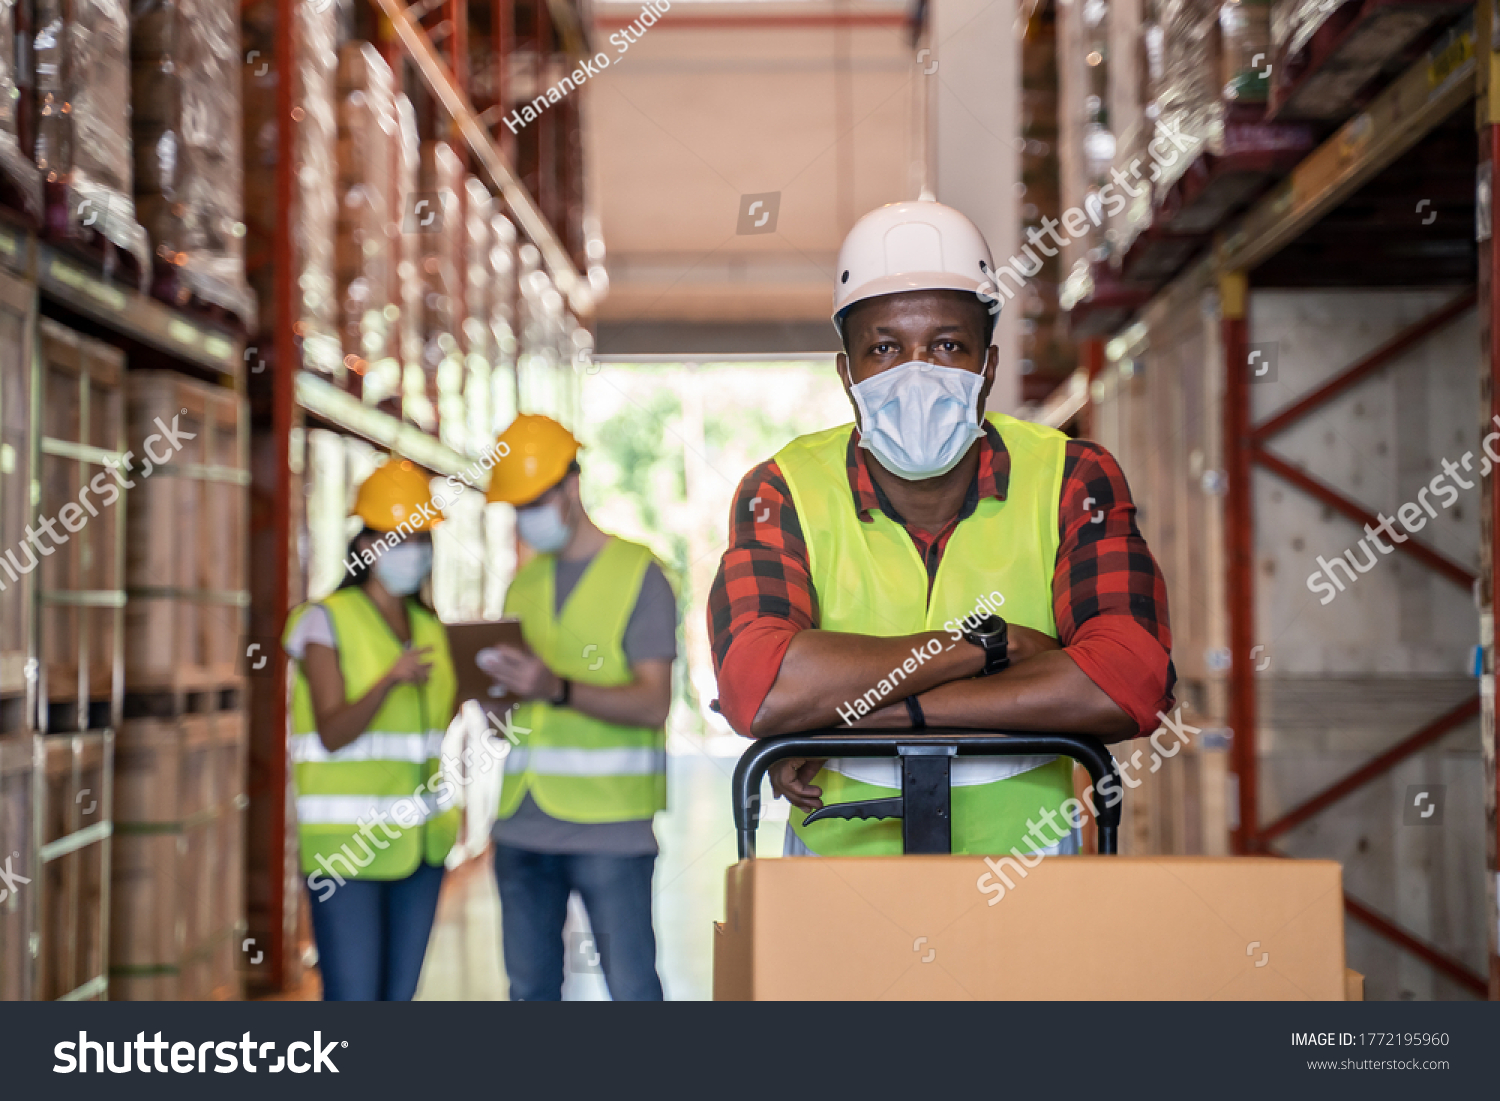 Group of diversity Workers wearing protective face mask working in factory warehouse. Black man pushing metal lathe cart with box parcel during covid 19 pandemic crisis. Logistic industry concept. #1772195960